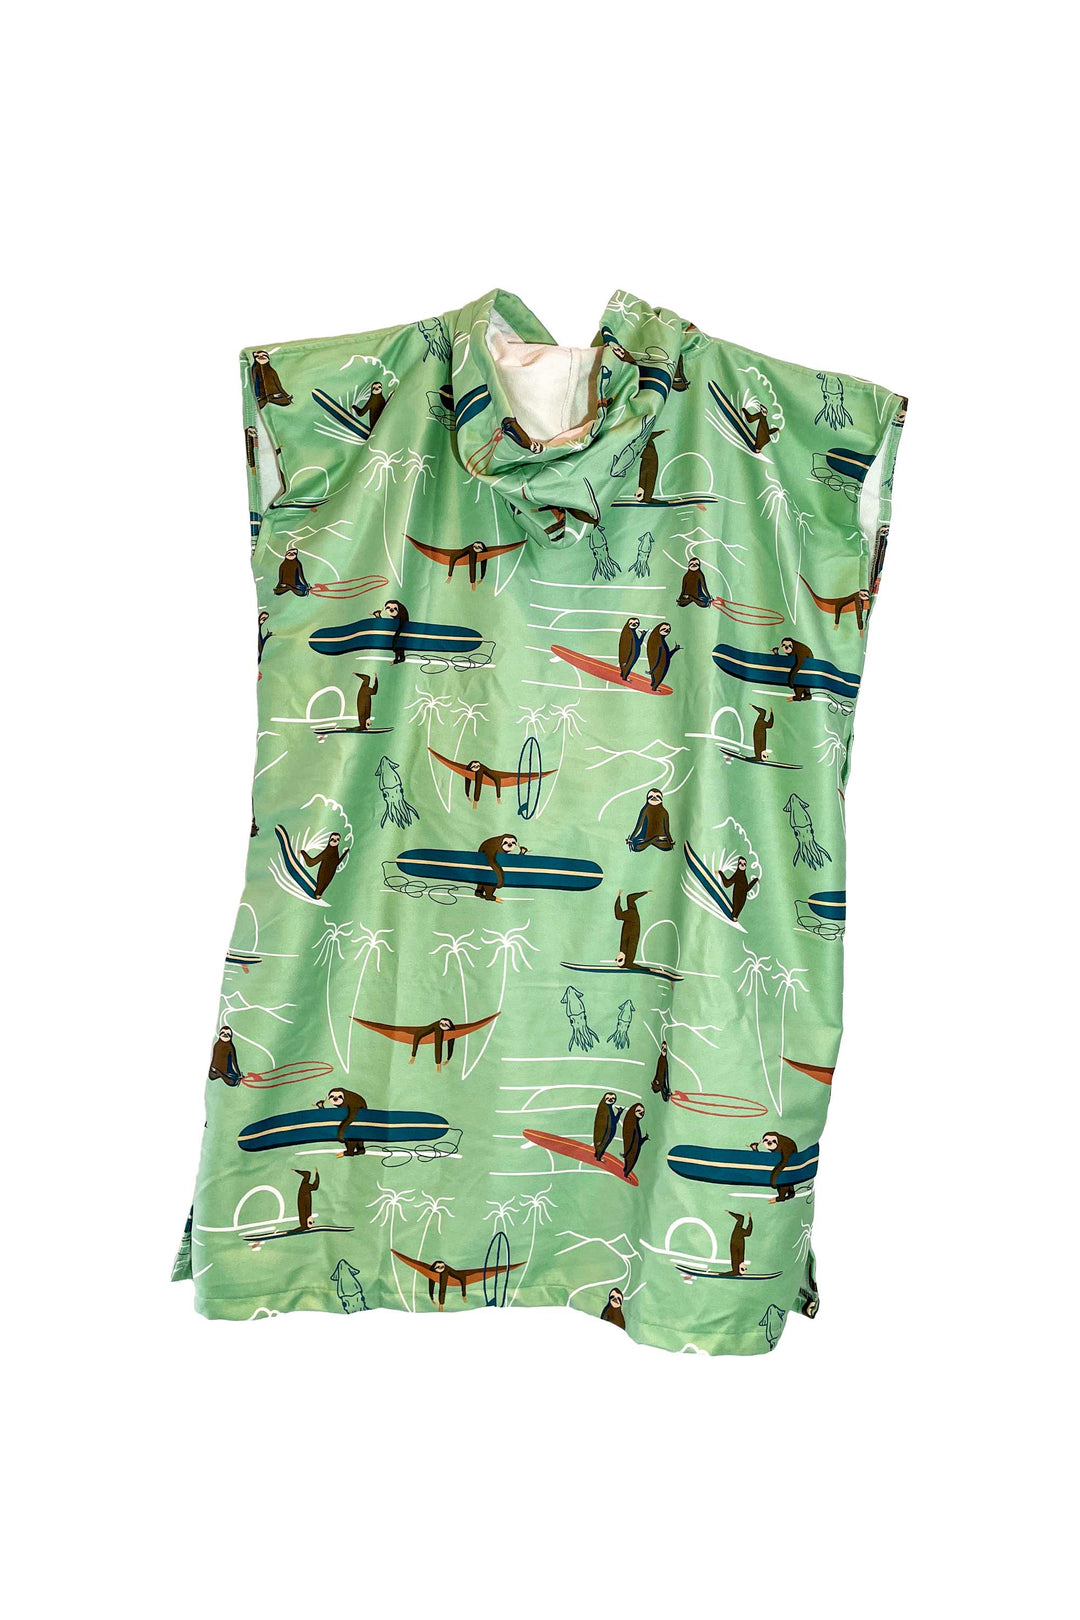 Travel Surfponcho SURFING SLOTHS adult - LIMITED EDITION